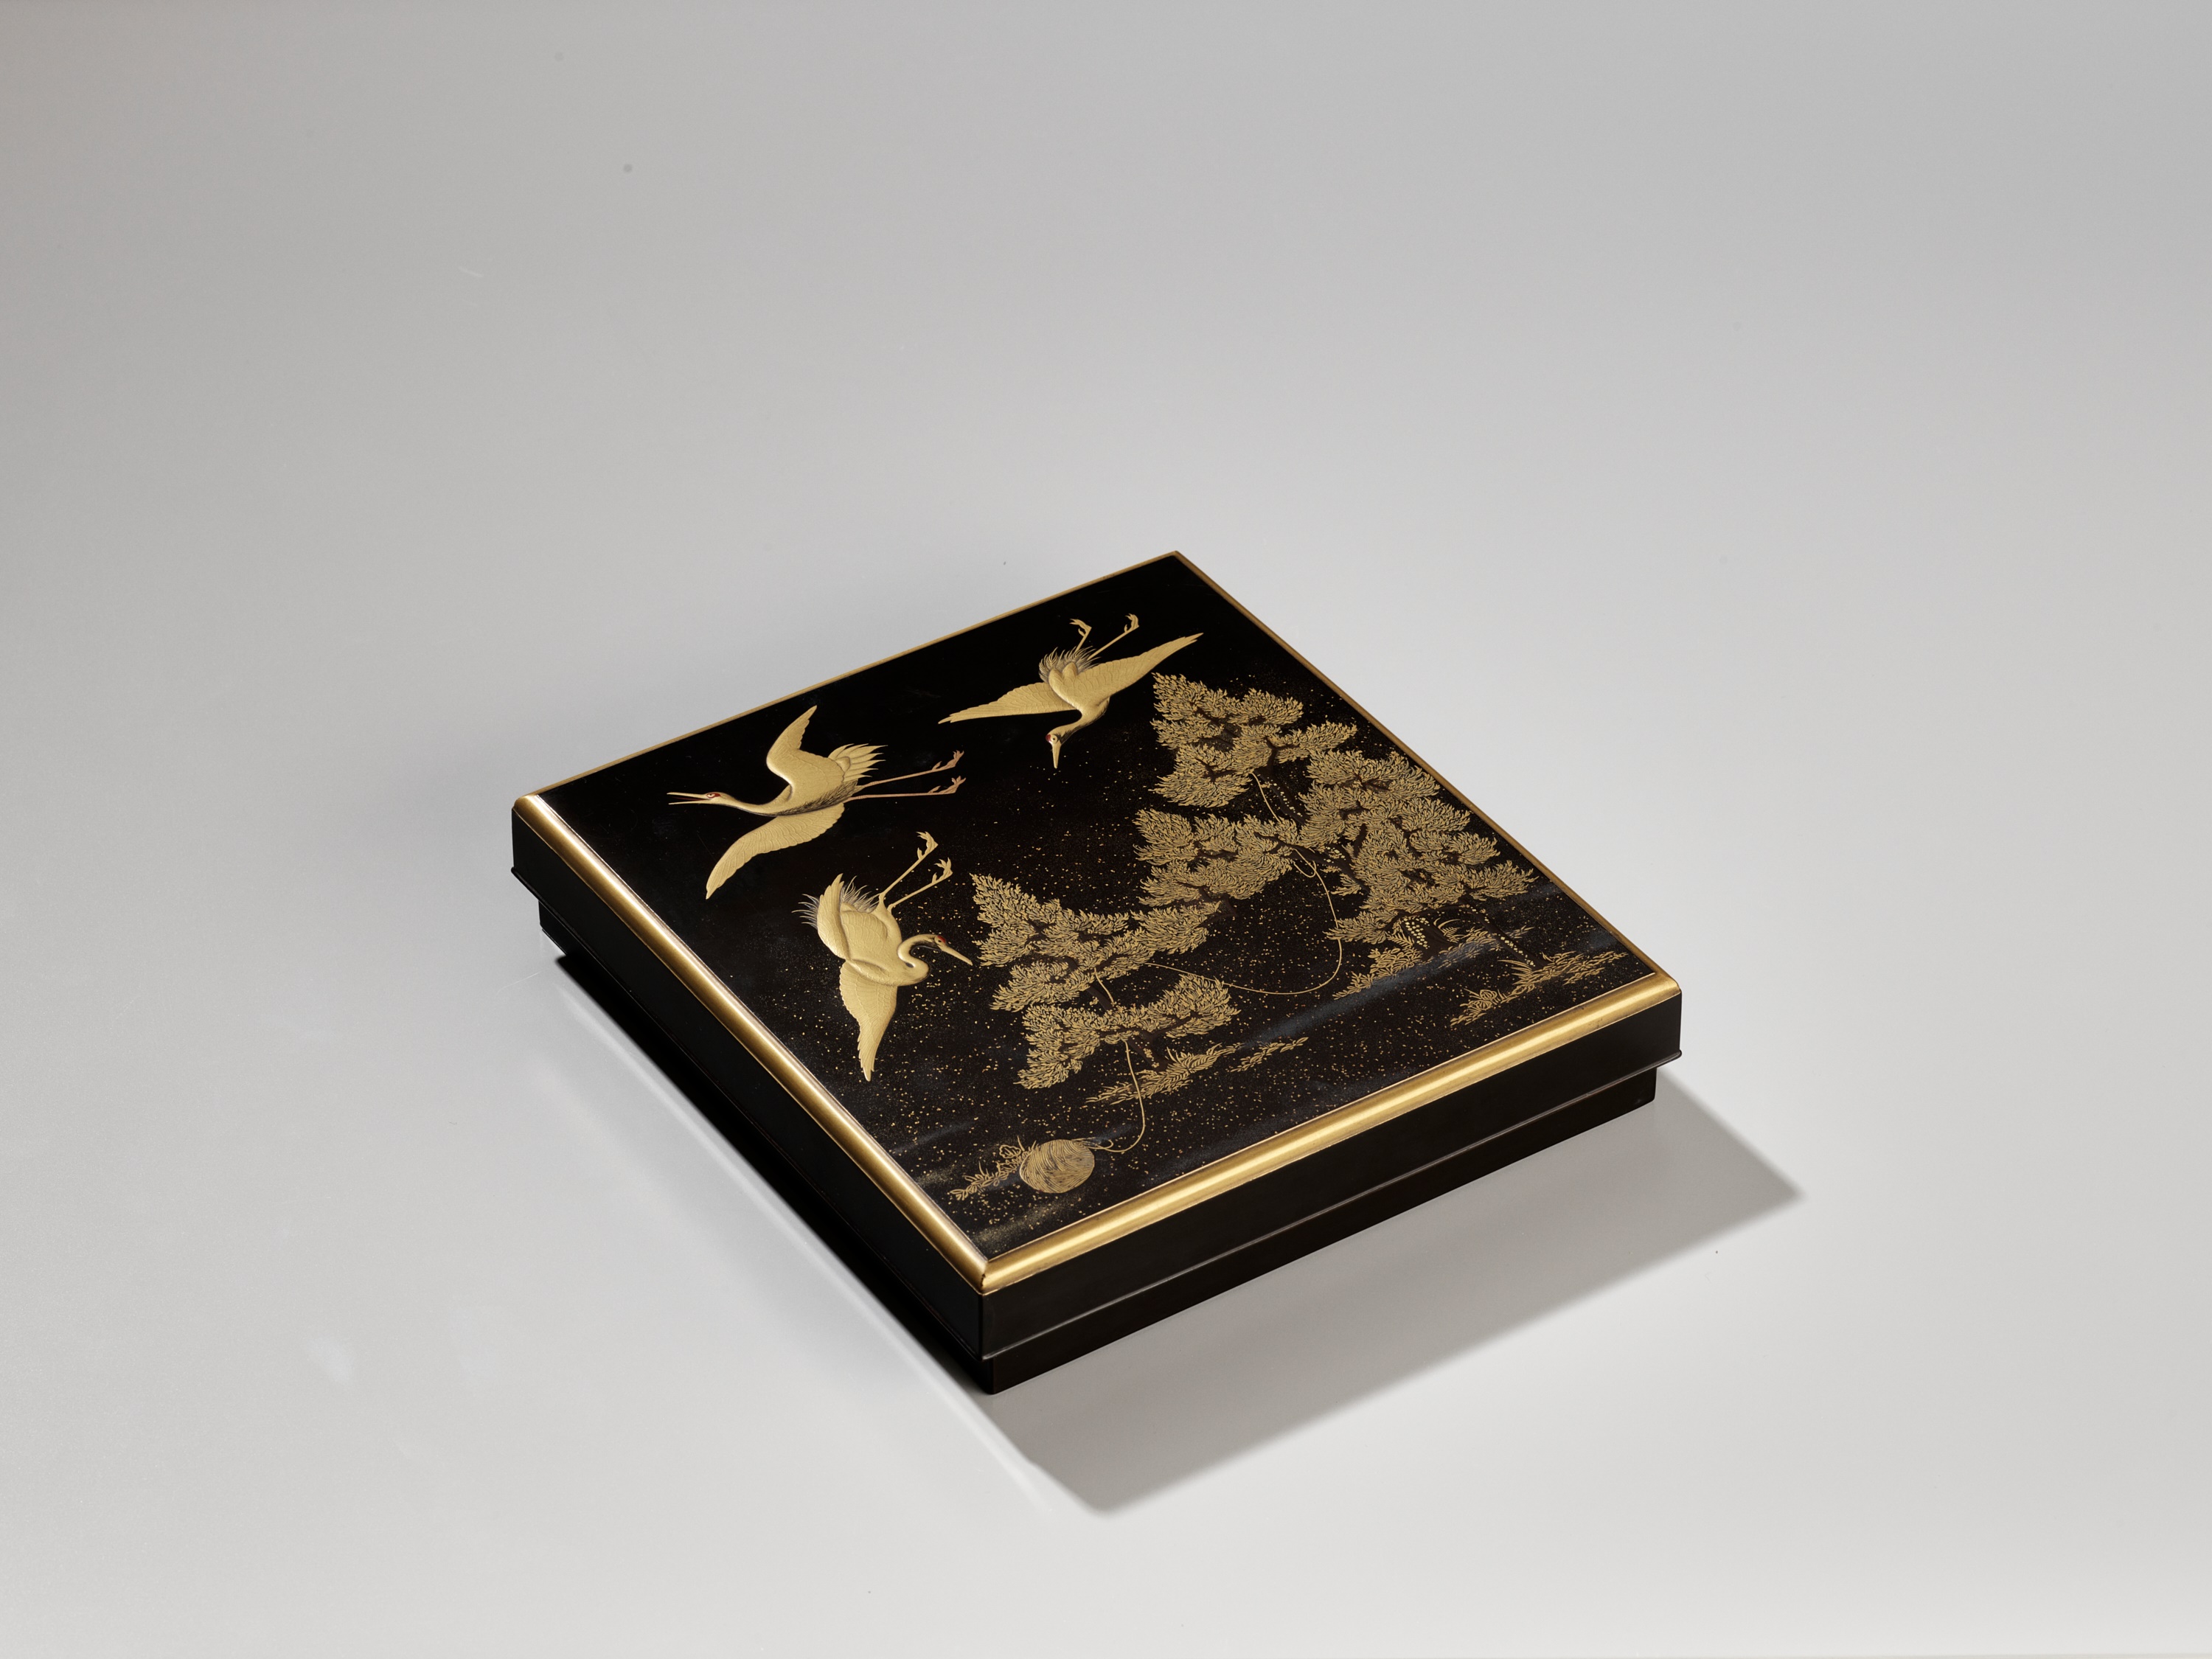 A LACQUER SUZURIBAKO AND COVER WITH CRANES - Image 10 of 12